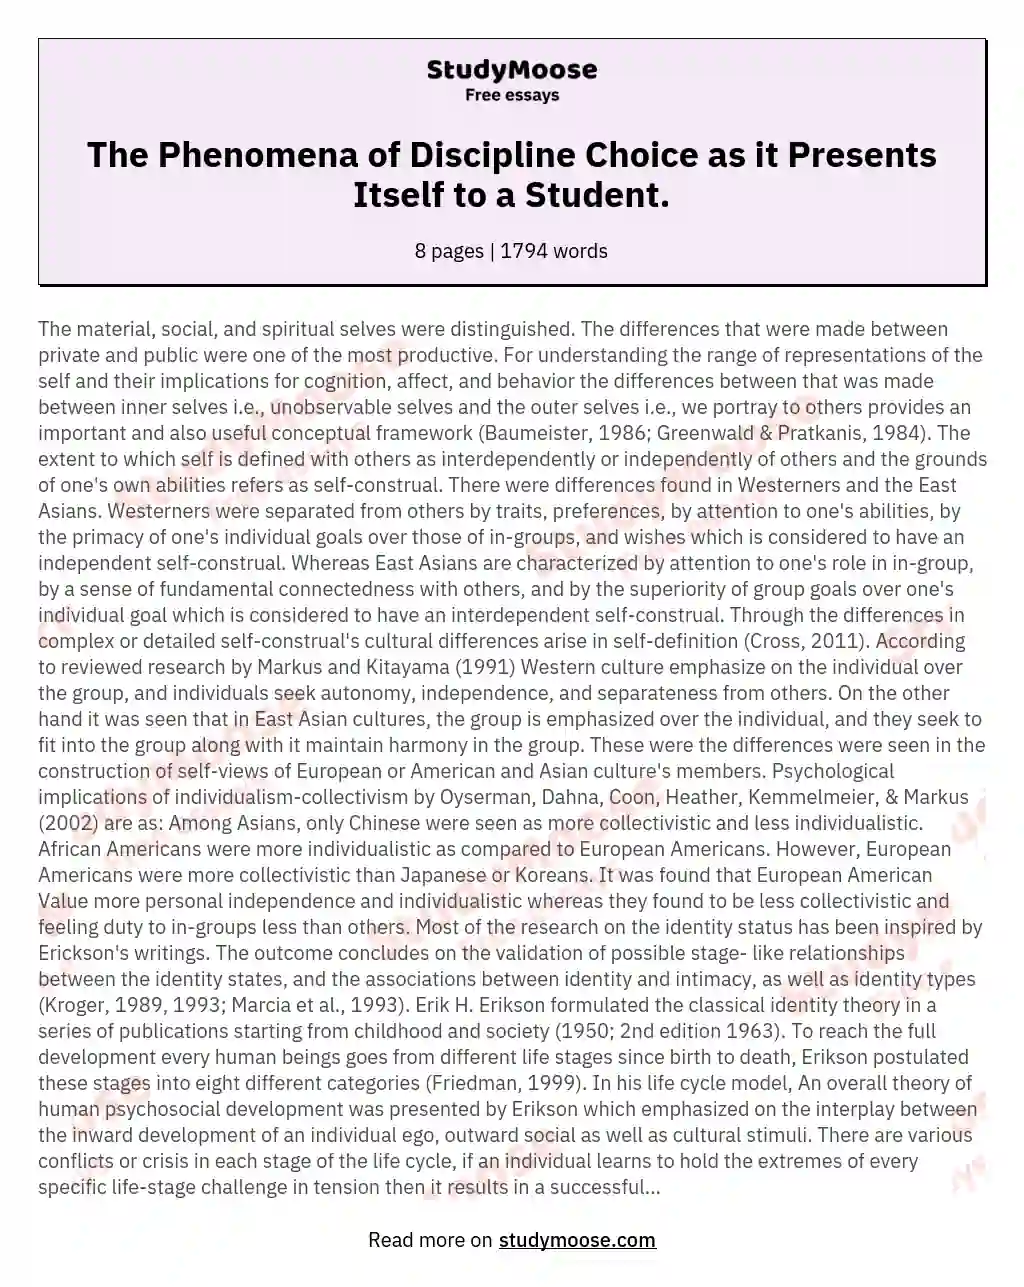 The Phenomena of Discipline Choice as it Presents Itself to a Student.